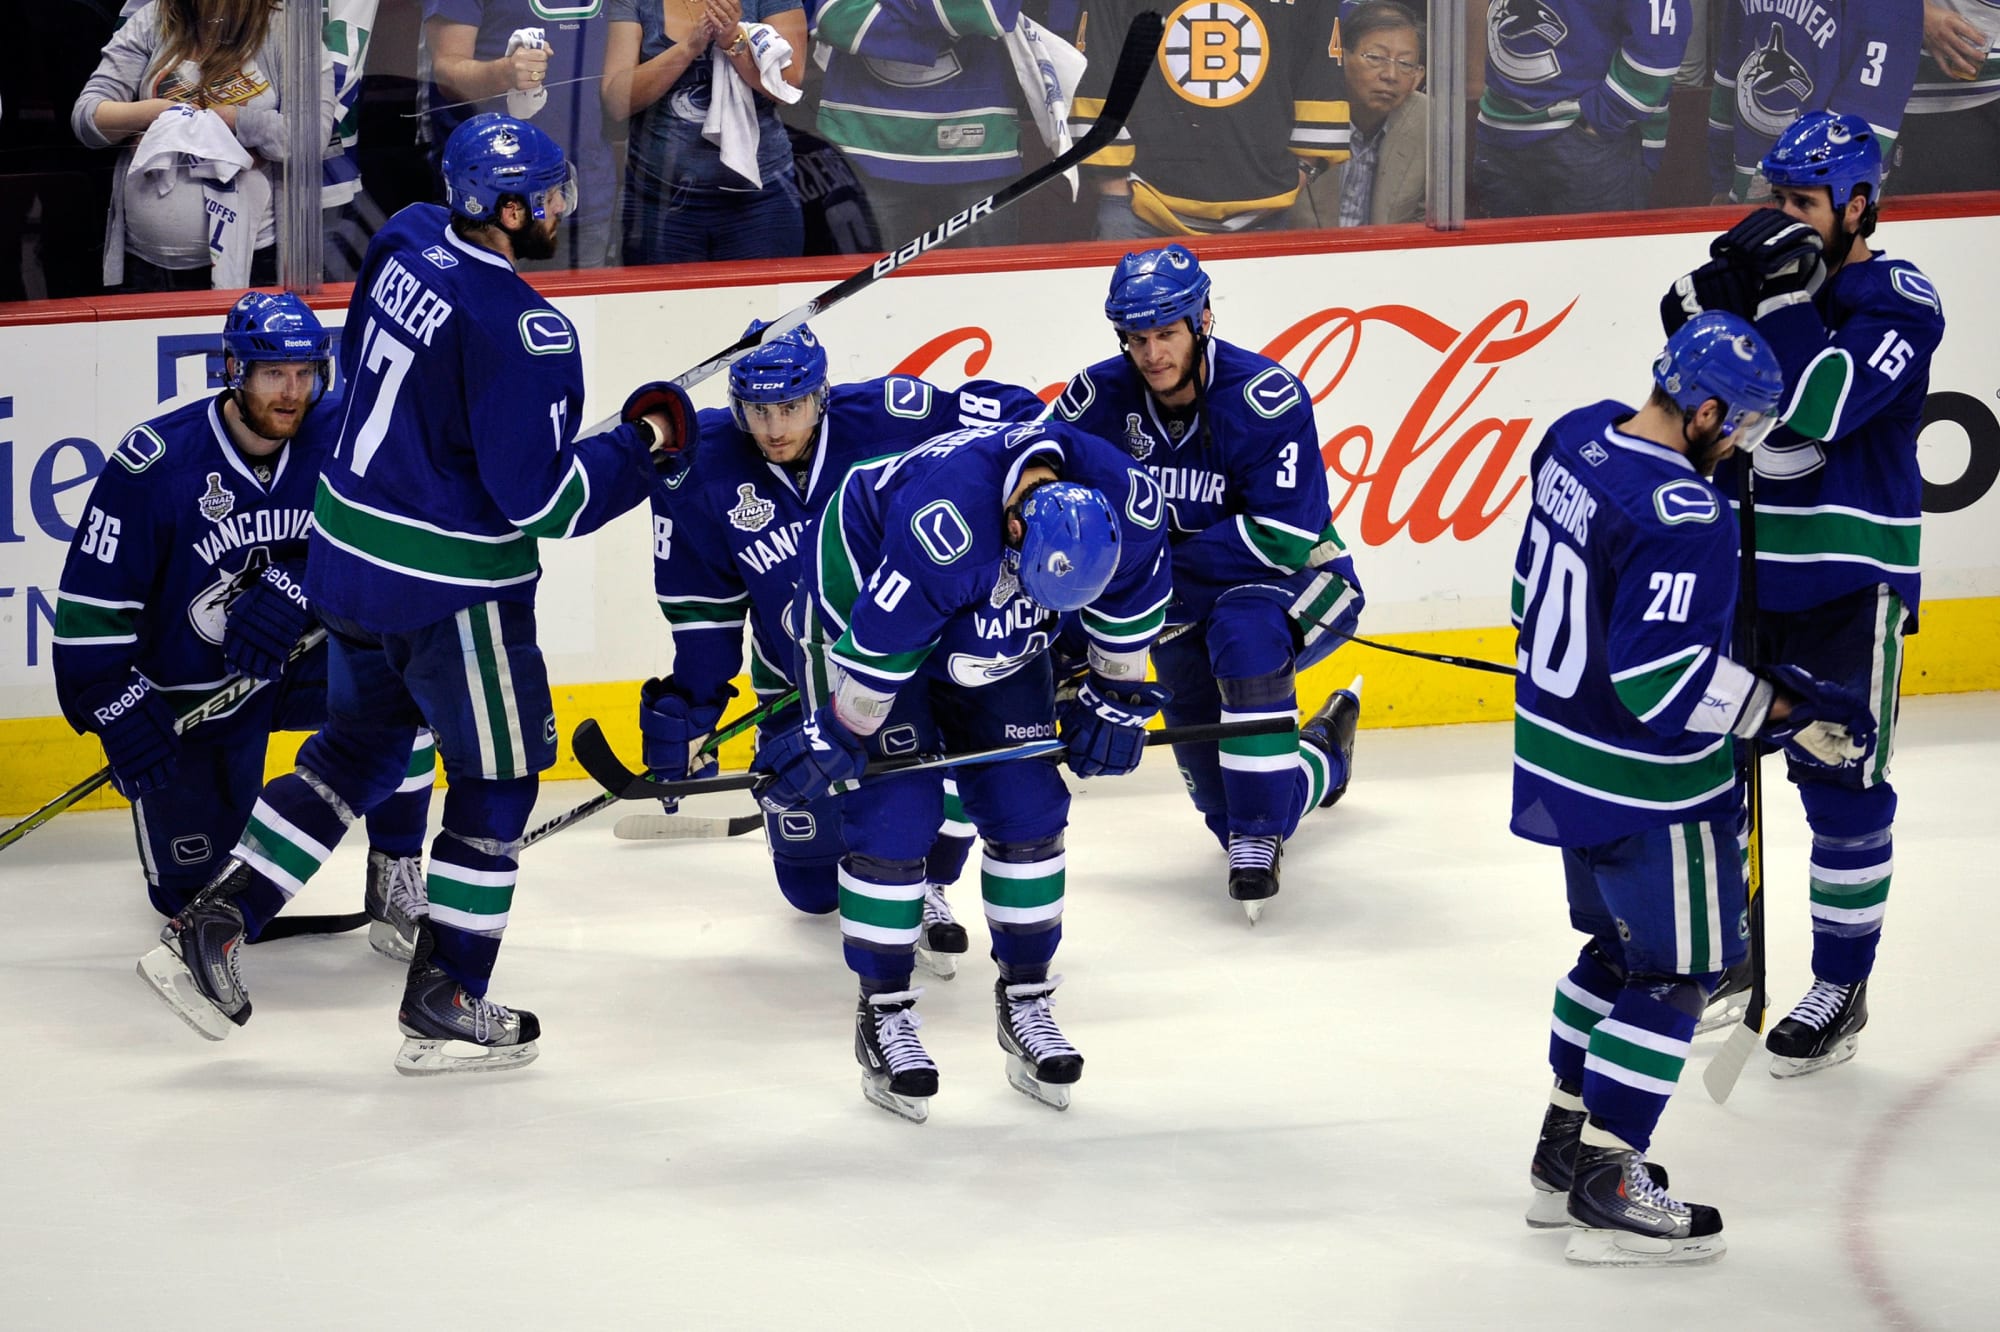 11 best moments from the Canucks' Stanley Cup run in 2011 (VIDEOS)